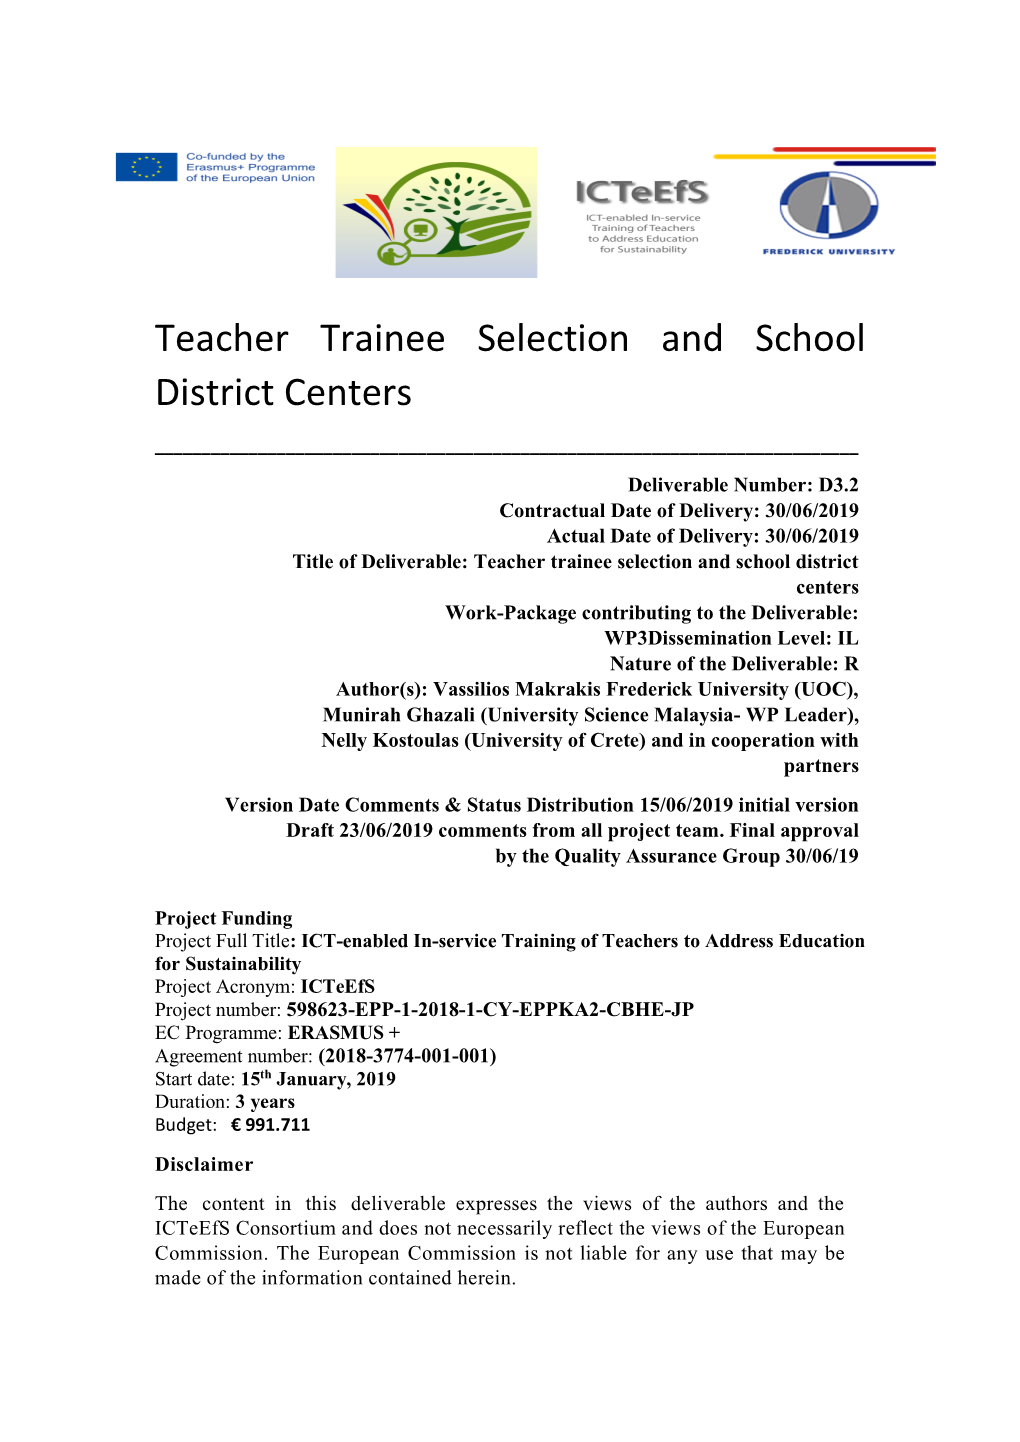 Teacher Trainee Selection and School District Centers